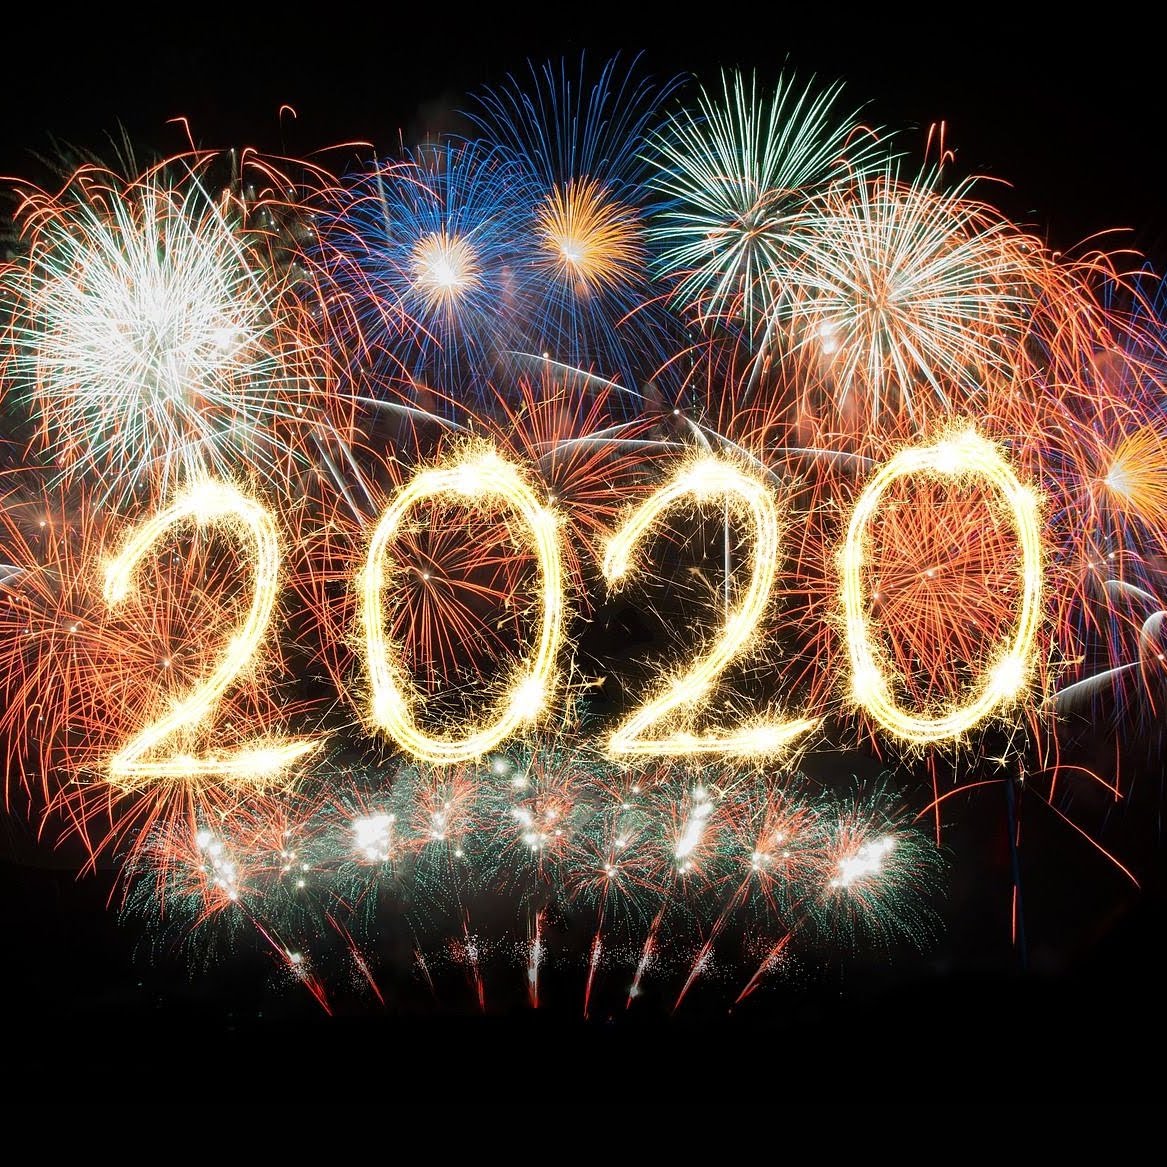 My 2020 Visions